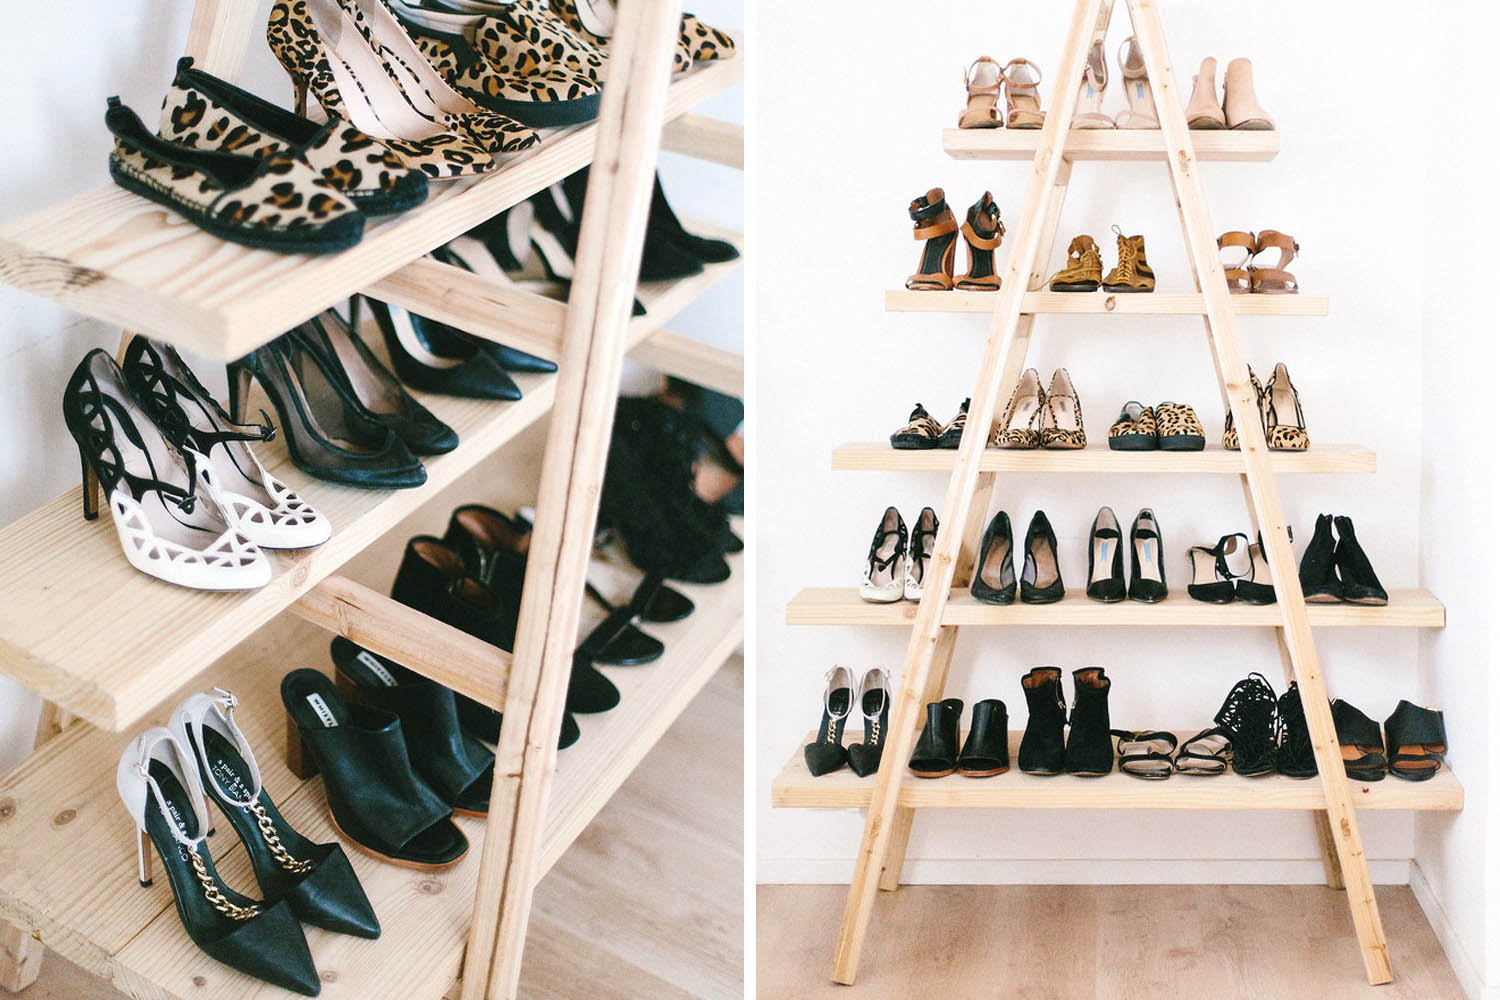 Behind the door shoe storage // Shoe organizing and storage ideas // organized home // storage solutions // closet organizing // small space // DIY shoe ladder shelf // inexpensive storage solutions // www.SimplySpaced.com